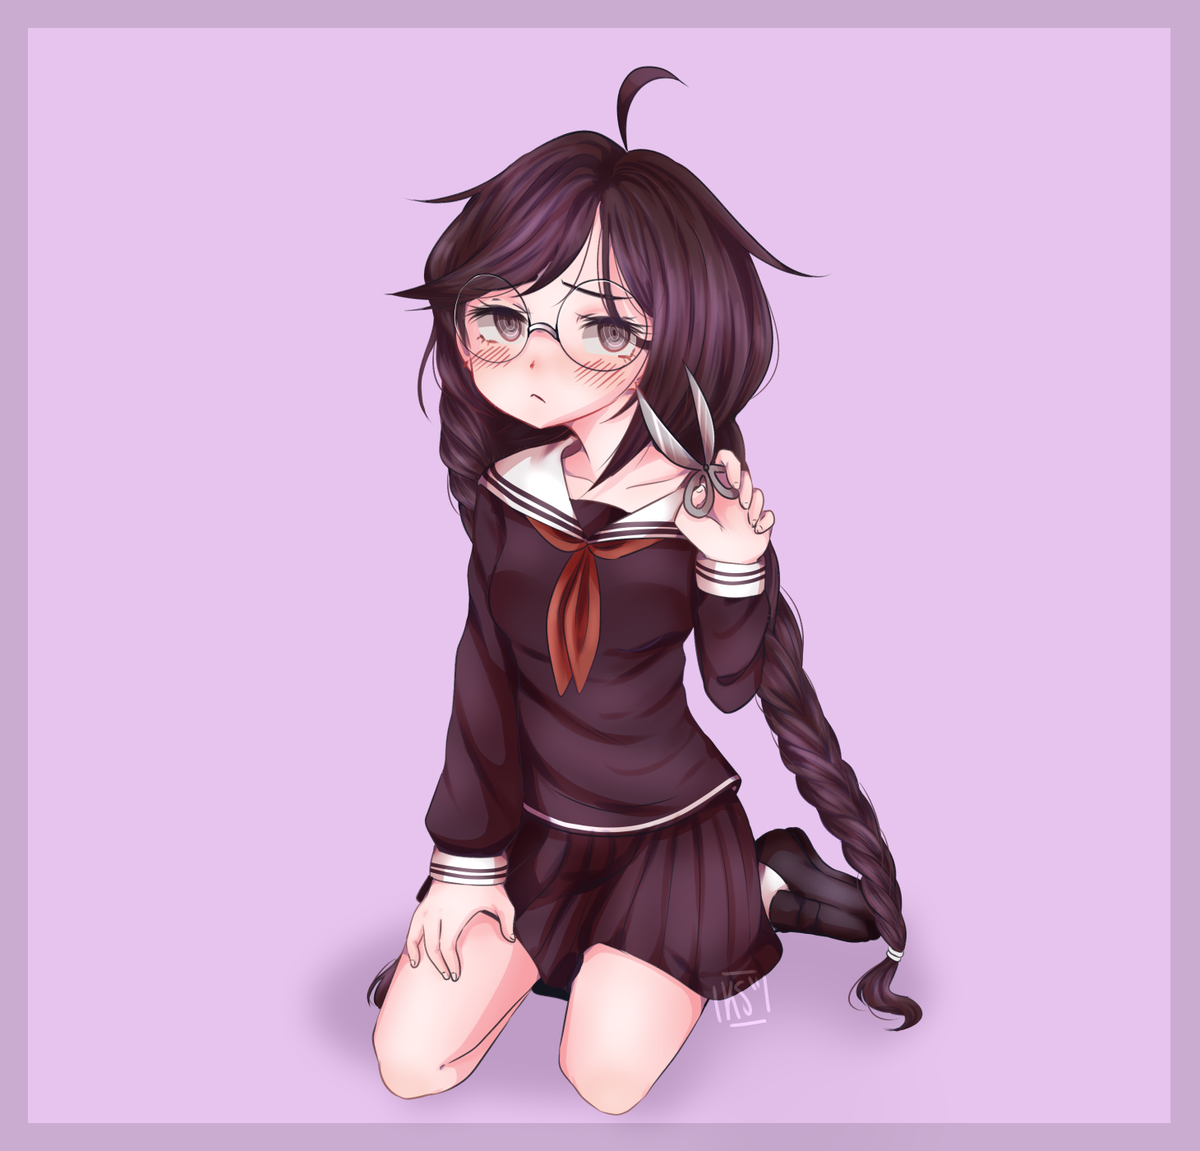 i drew the girl toko!! i fucking love her so much AAAAAA please take this d...